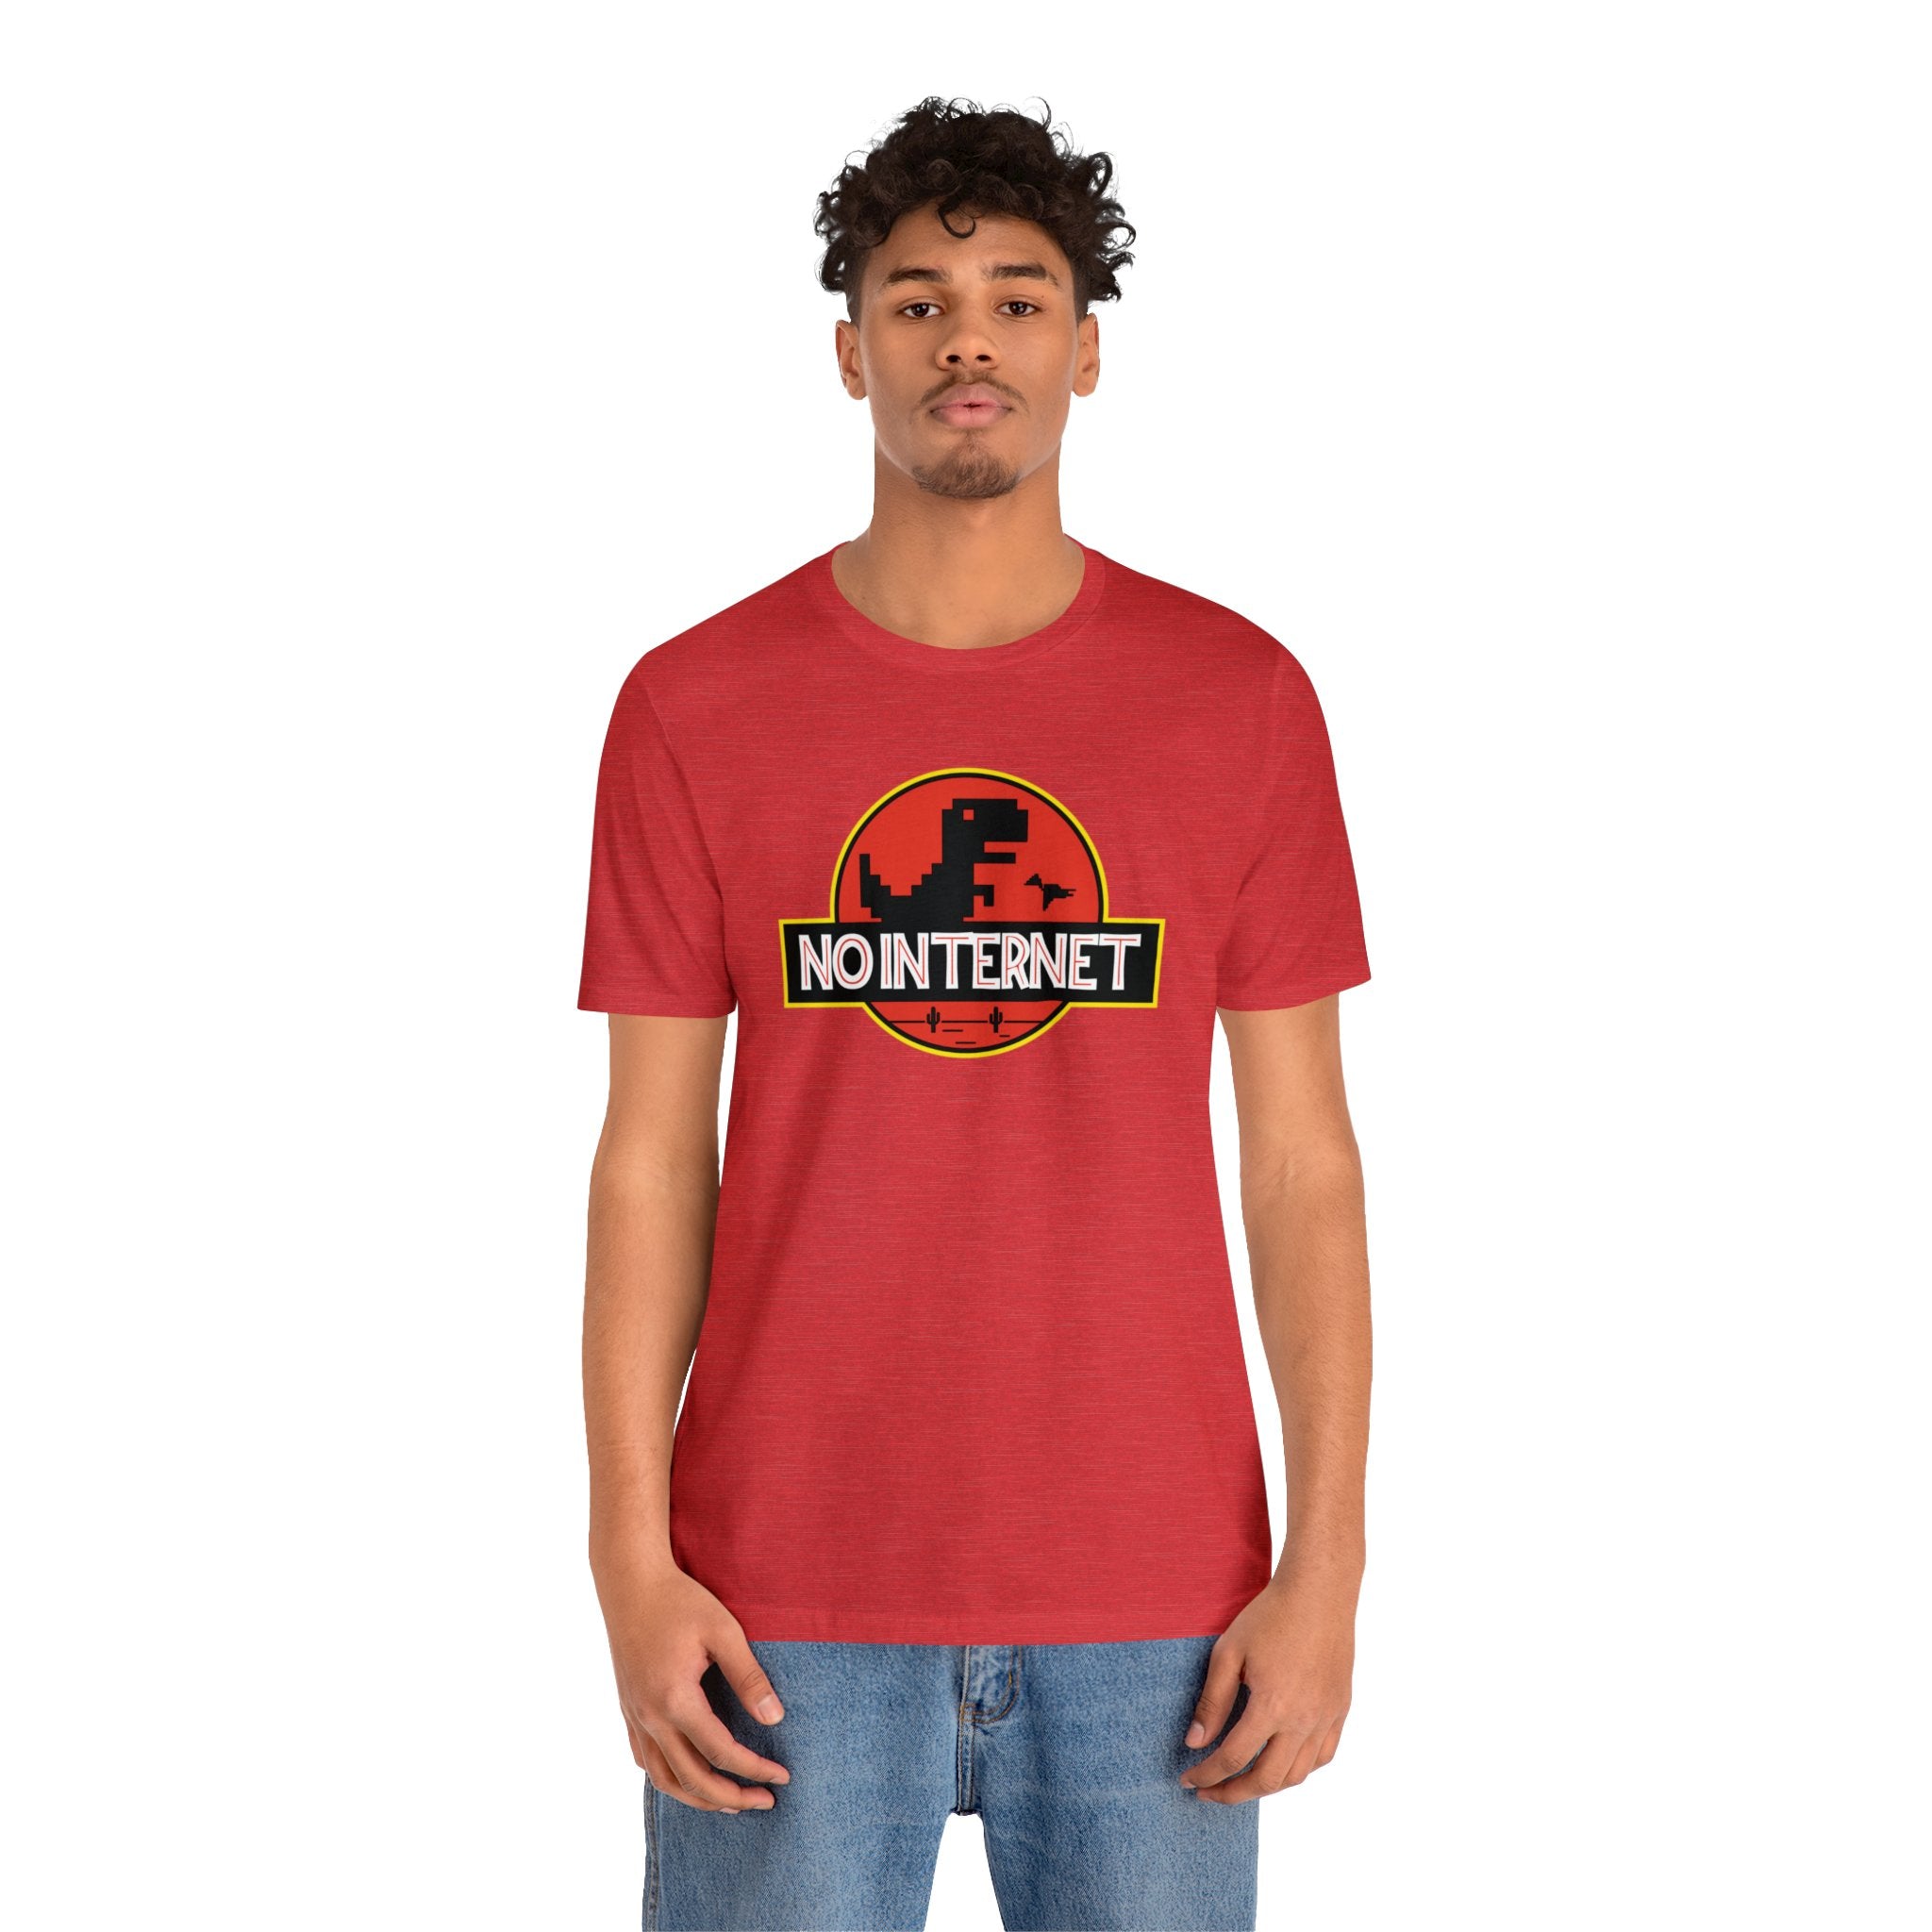 A man wearing a red t-shirt with the No Internet T-Shirt logo, representing Geekpsters.